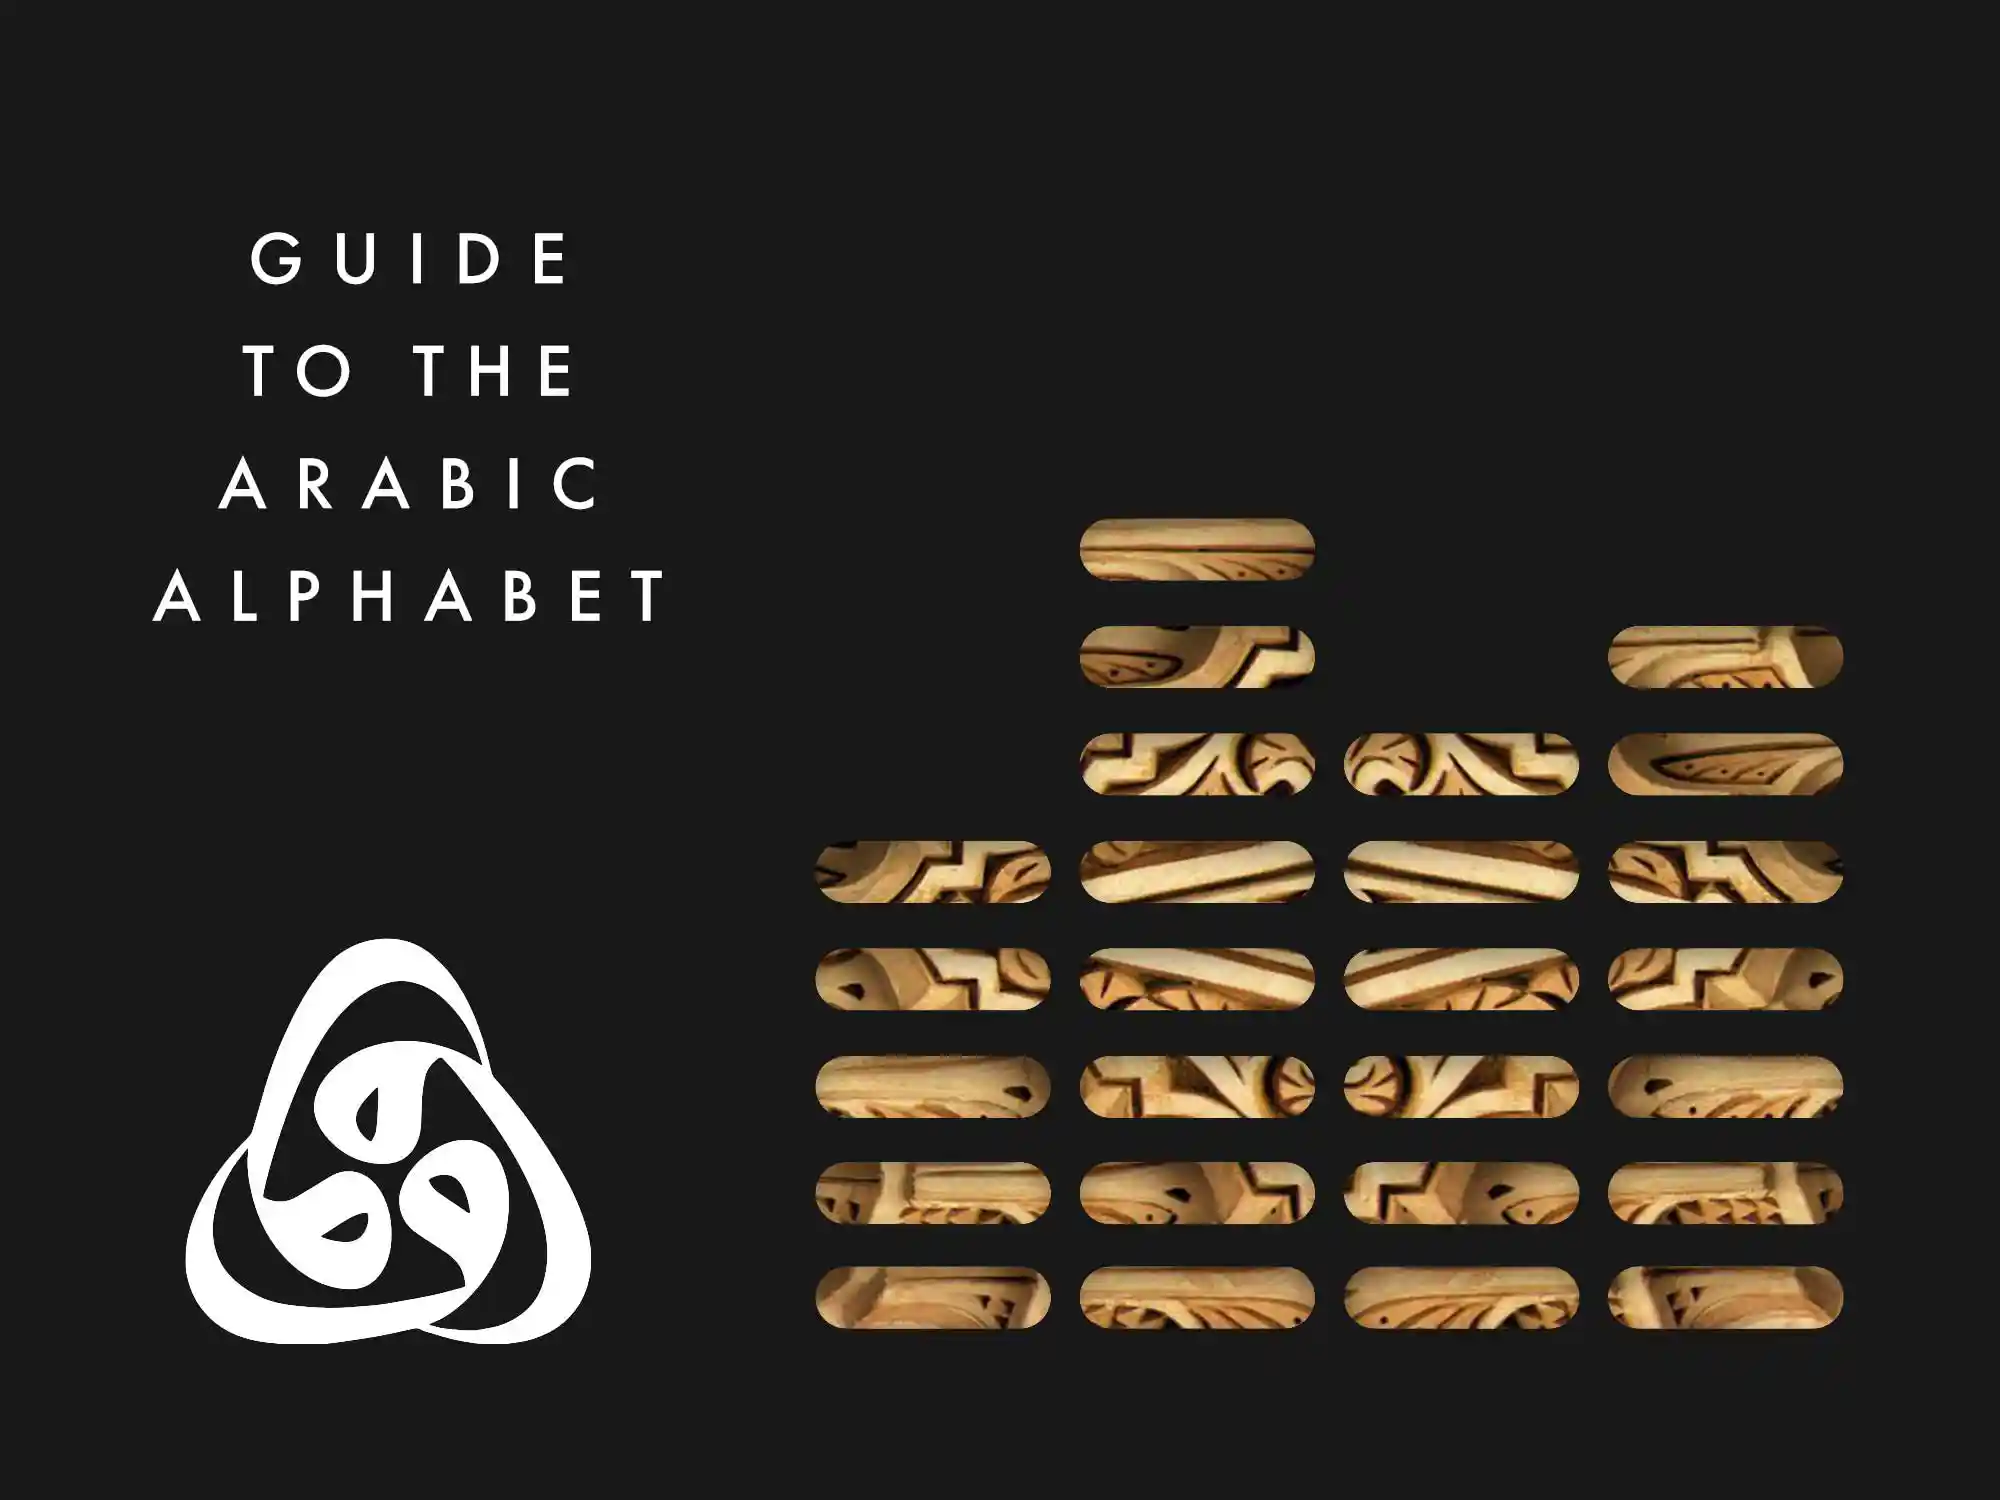 Guide to the Arabic Alphabet Cover Image Arabic Letters